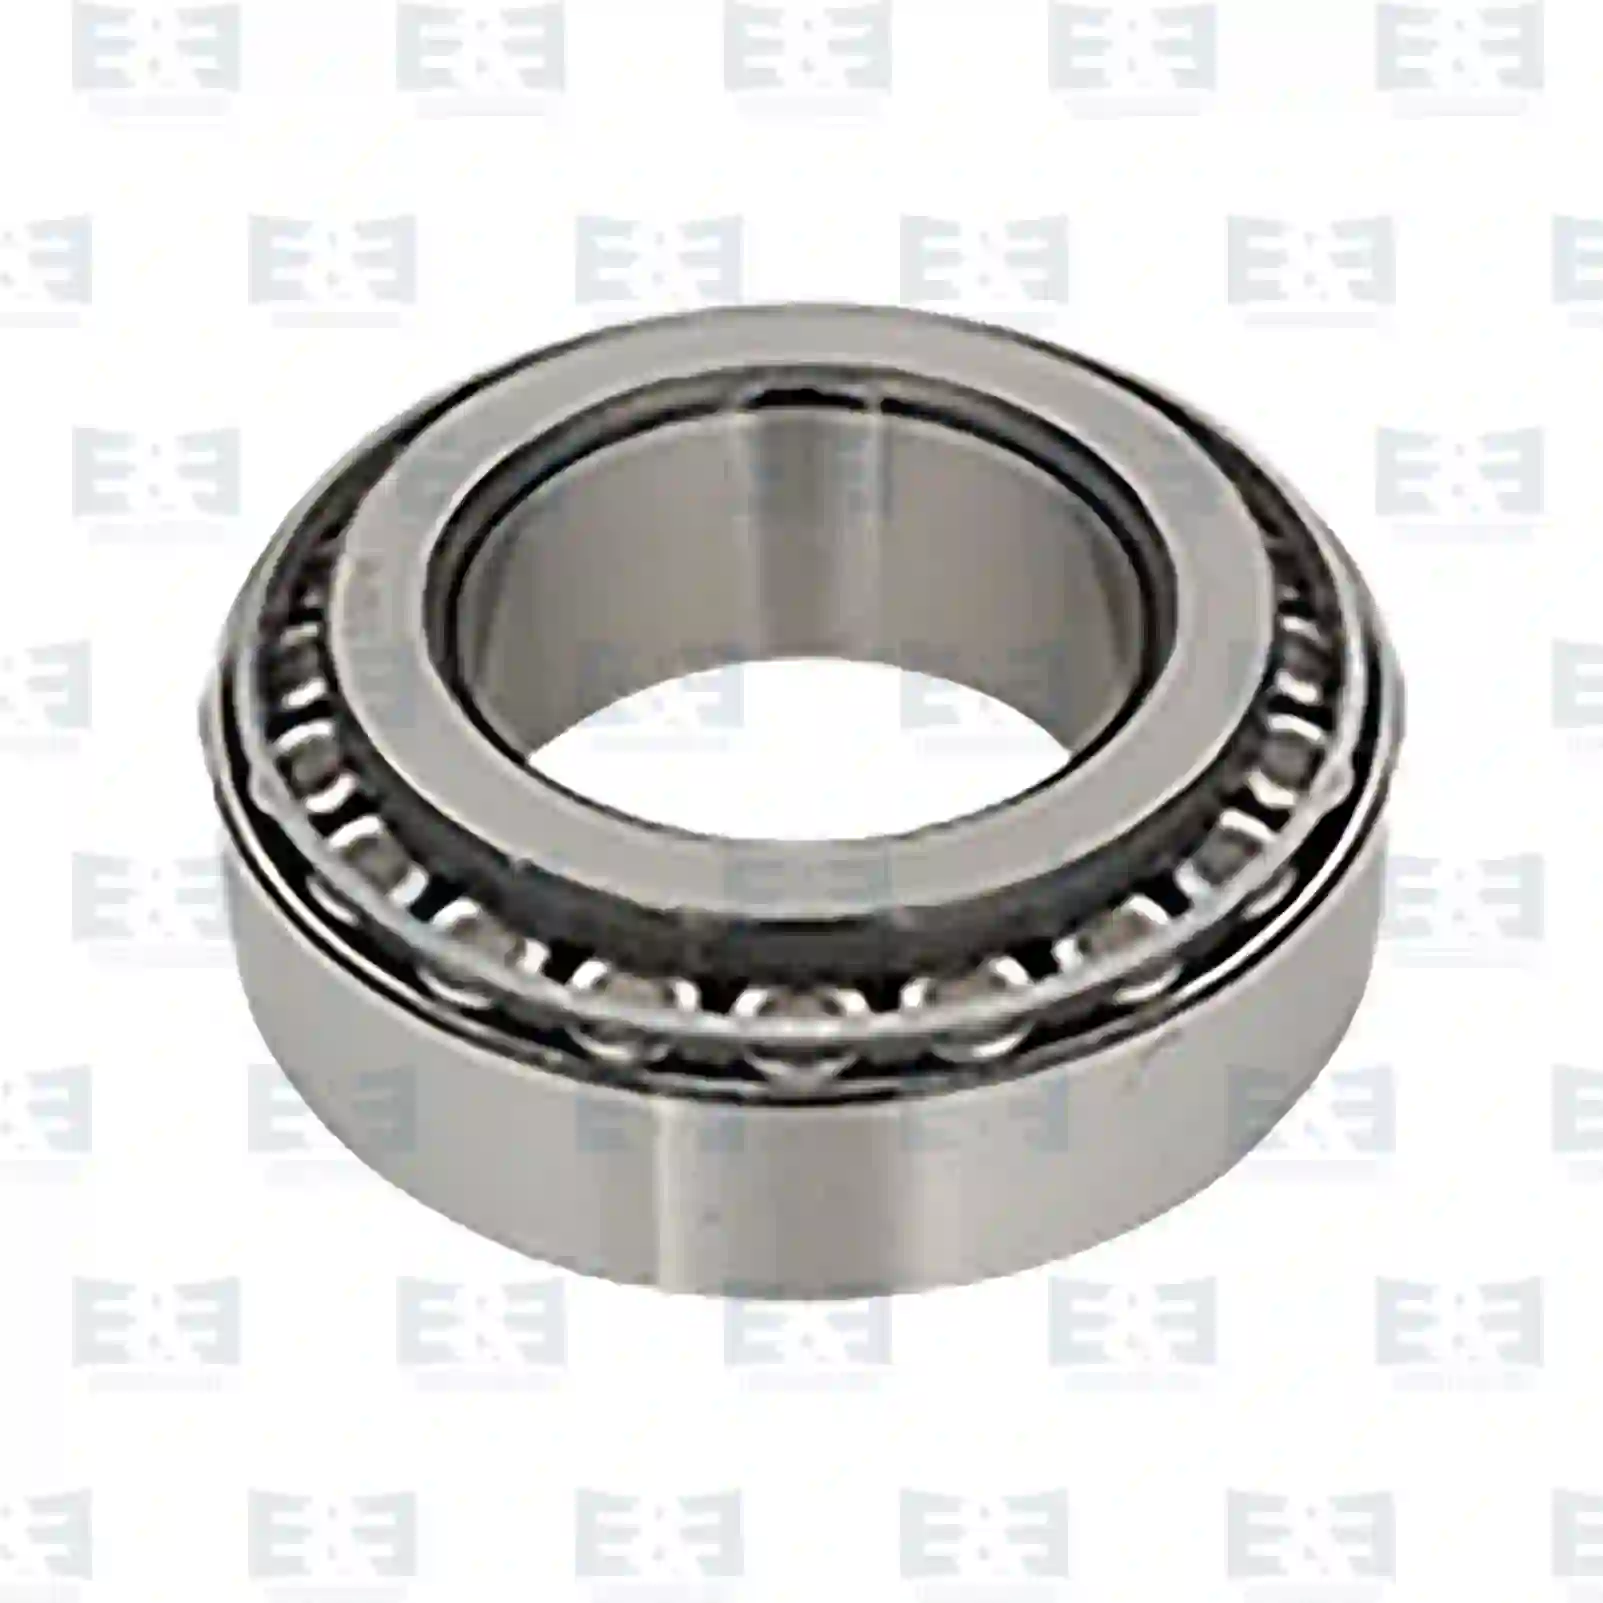 Bearings Tapered roller bearing, EE No 2E2286436 ,  oem no:0556290, 556290, 005103365, 00712166, 5010587008, 5000675627, 5000785898, 5000785909, 5000849617, 5010587008, 20723502, ZG03020-0008 E&E Truck Spare Parts | Truck Spare Parts, Auotomotive Spare Parts